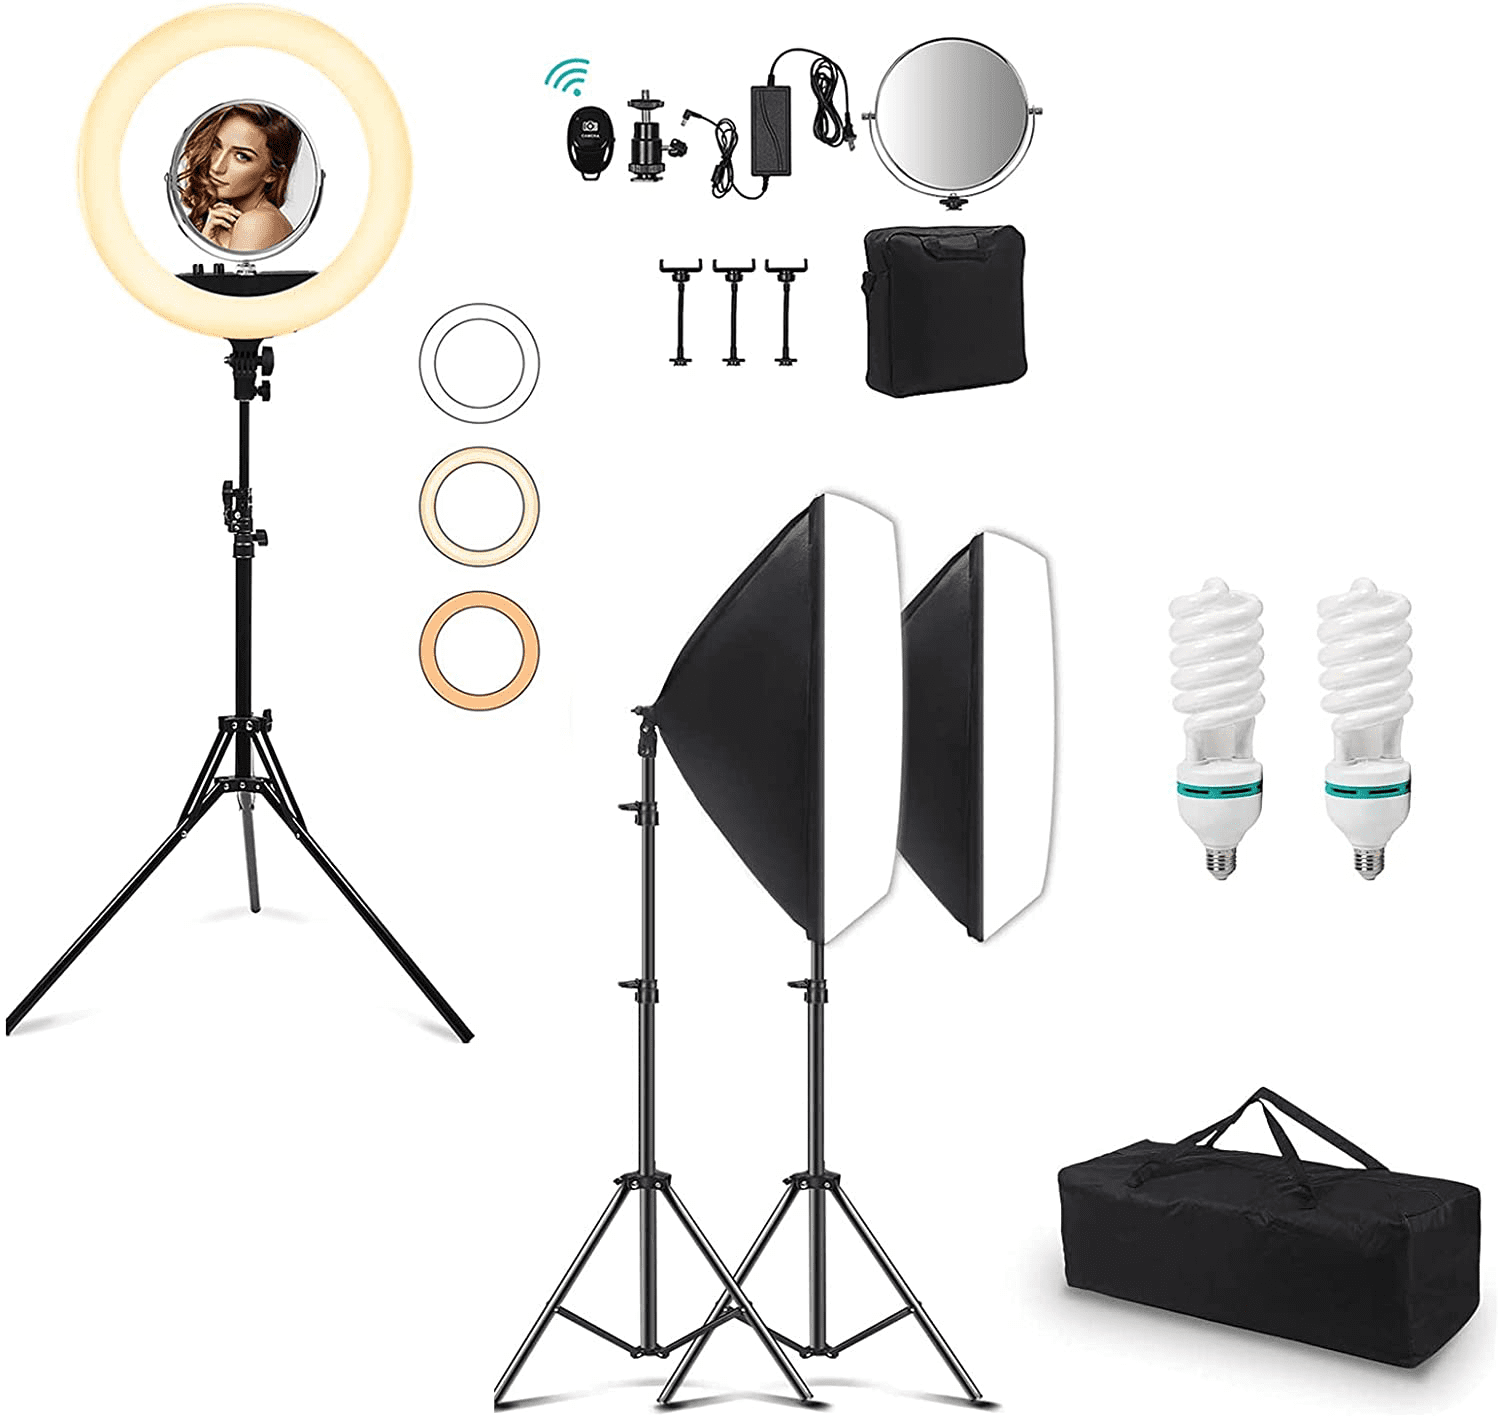 18 Ring Light Kit 65W Bluetooth LED Ringlight with Tripod,Softbox Lighting Kit Photography Studio Continuous Lighting Equipment 20x 27 inch